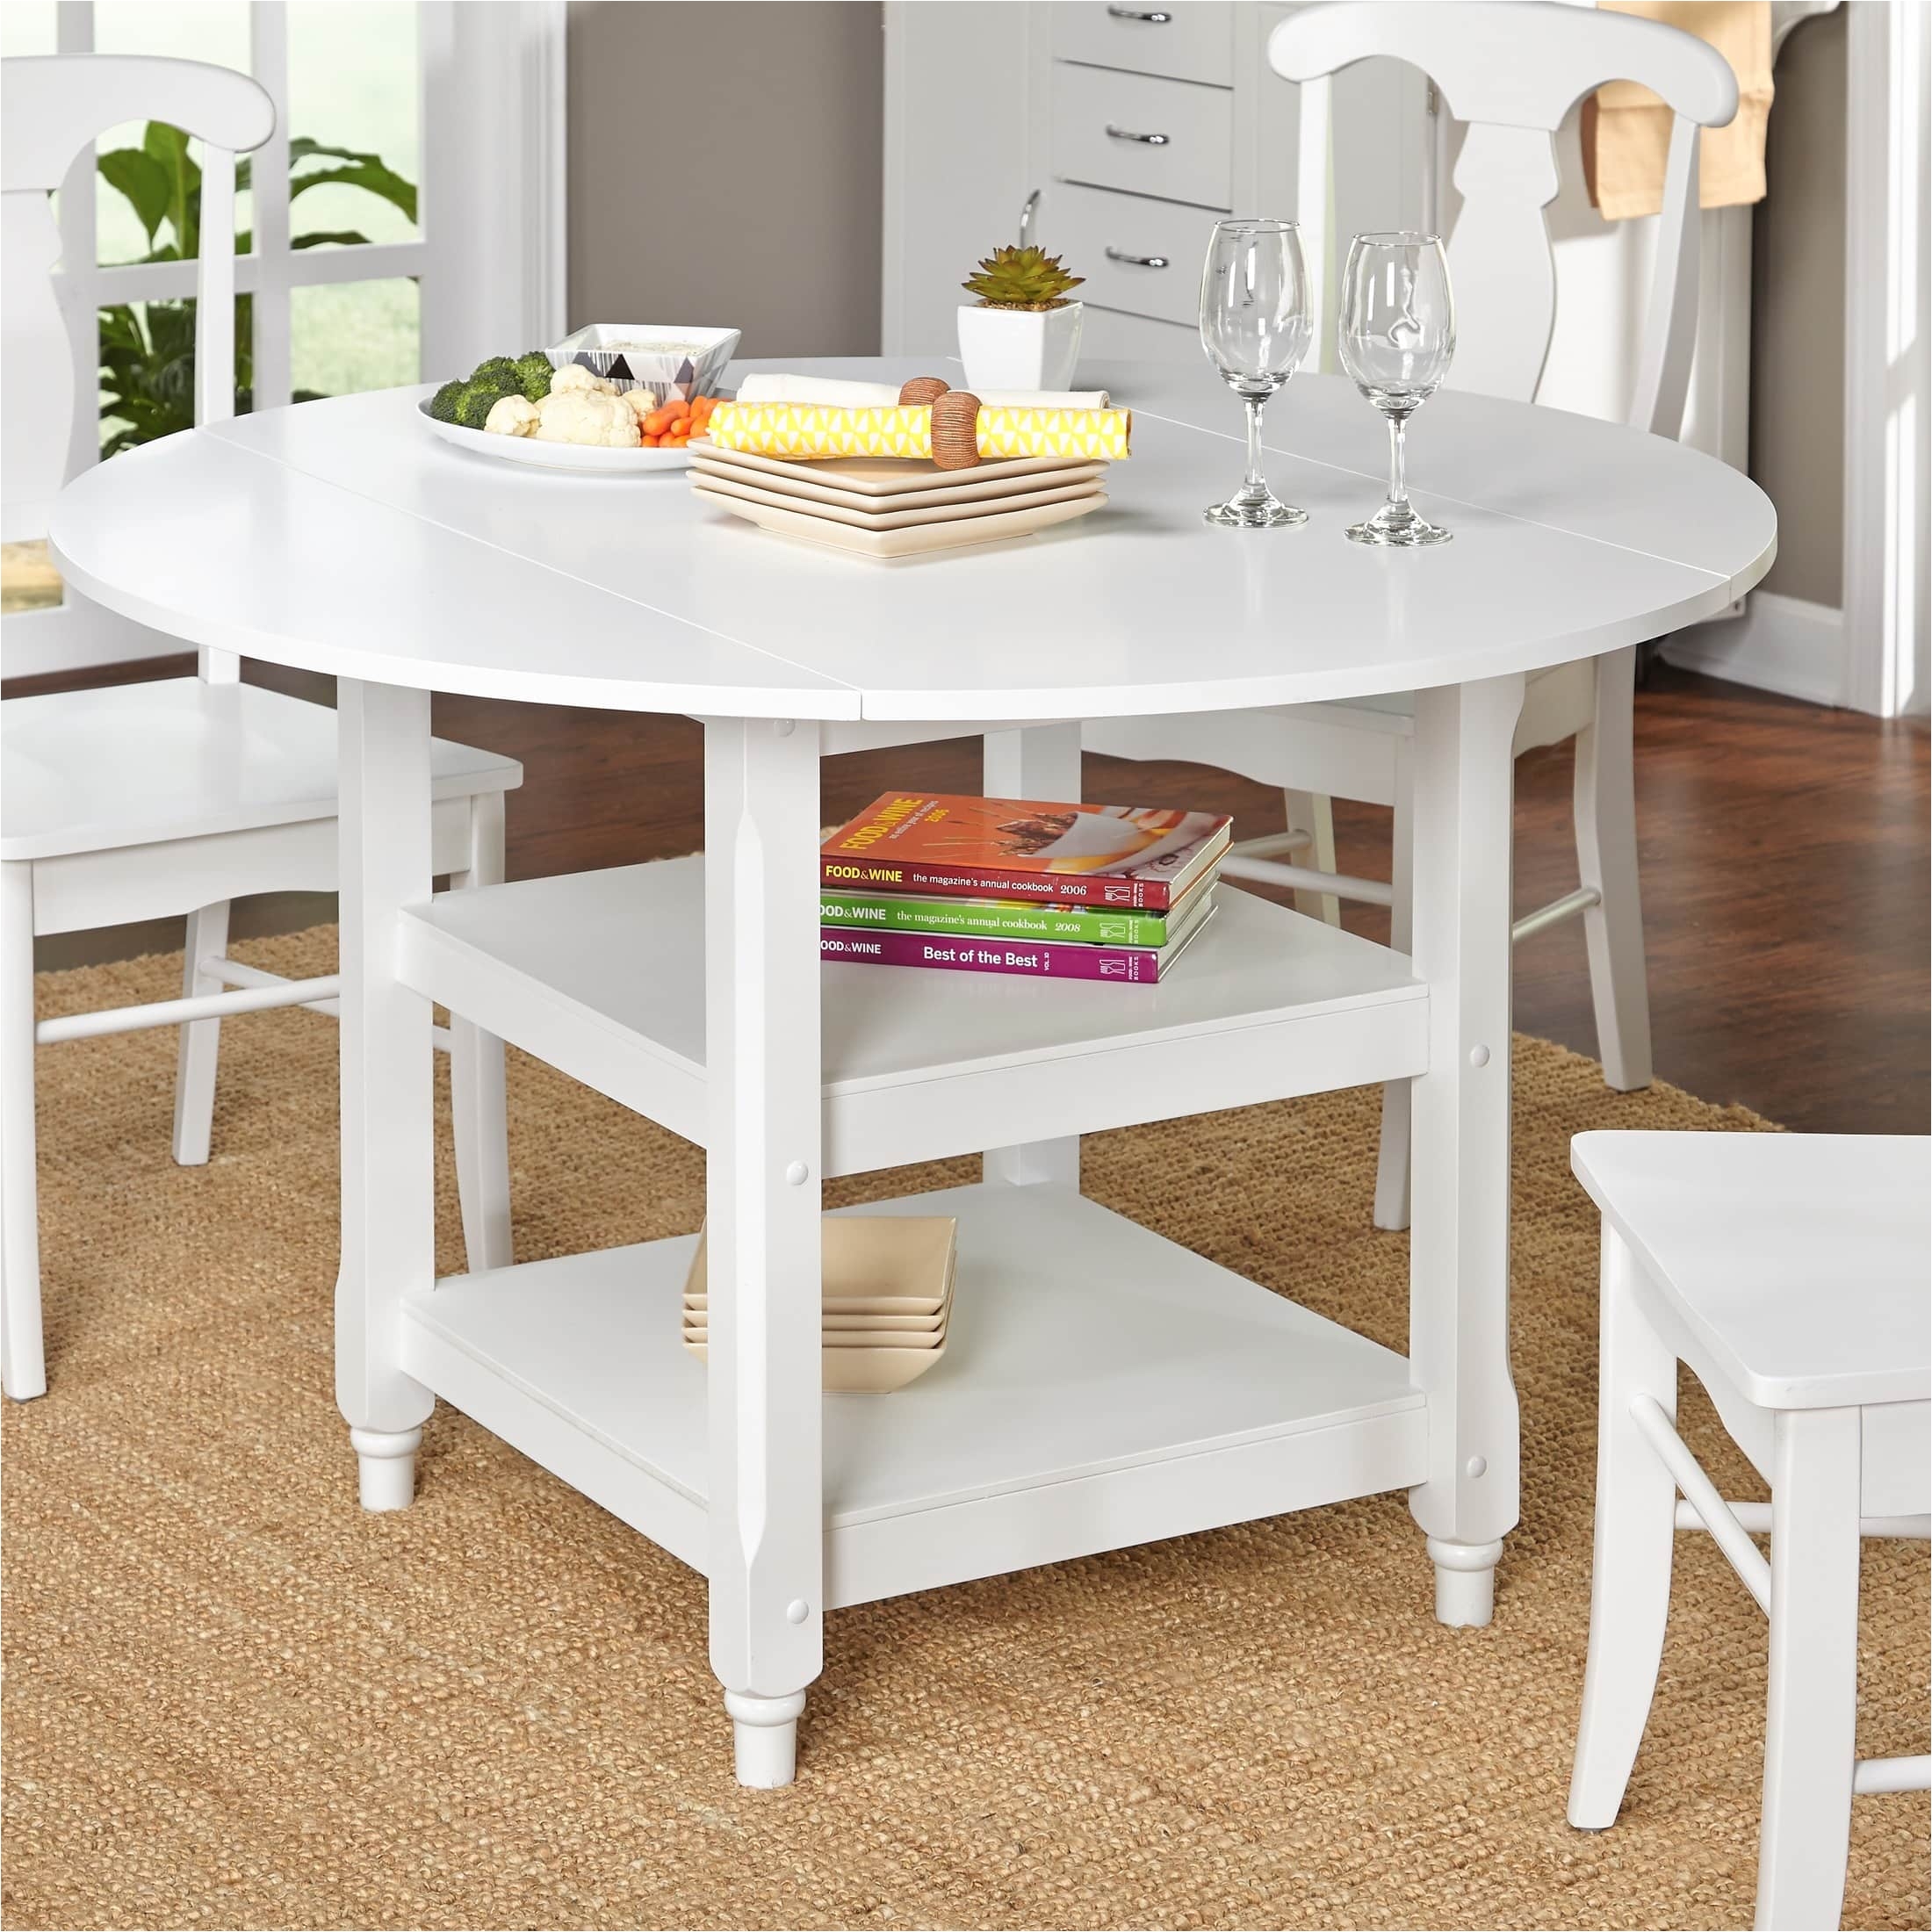 shop simple living cottage white round dining table free shipping today overstock com 2560434